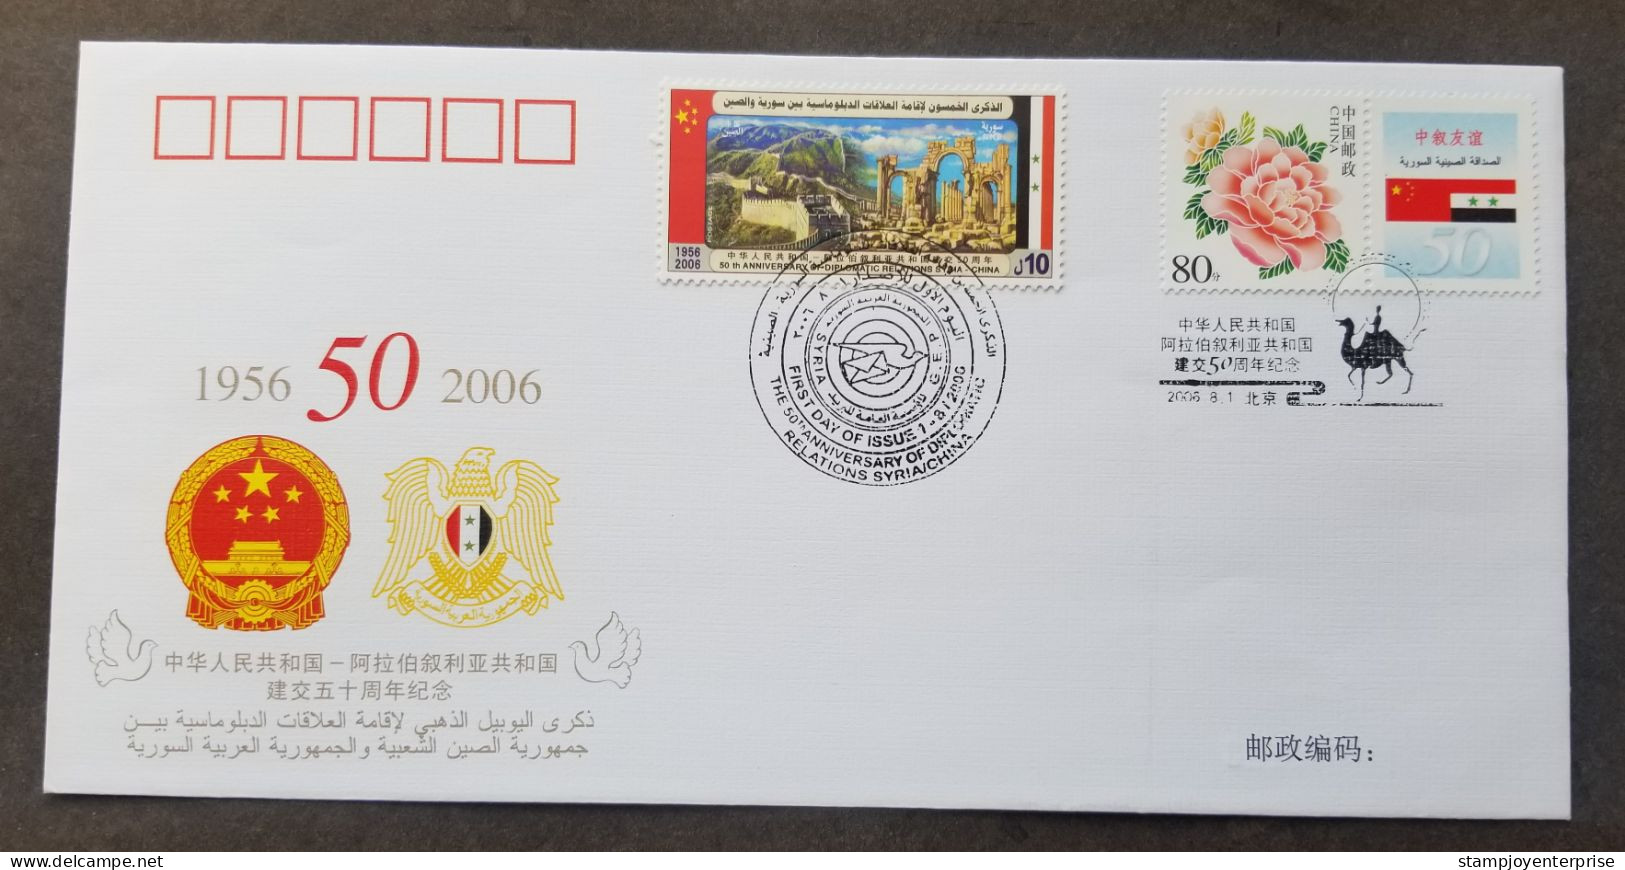 China Arab Syria 50th Diplomatic Issue 2006 Great Wall Flower (joint FDC) *dual PMK - Covers & Documents